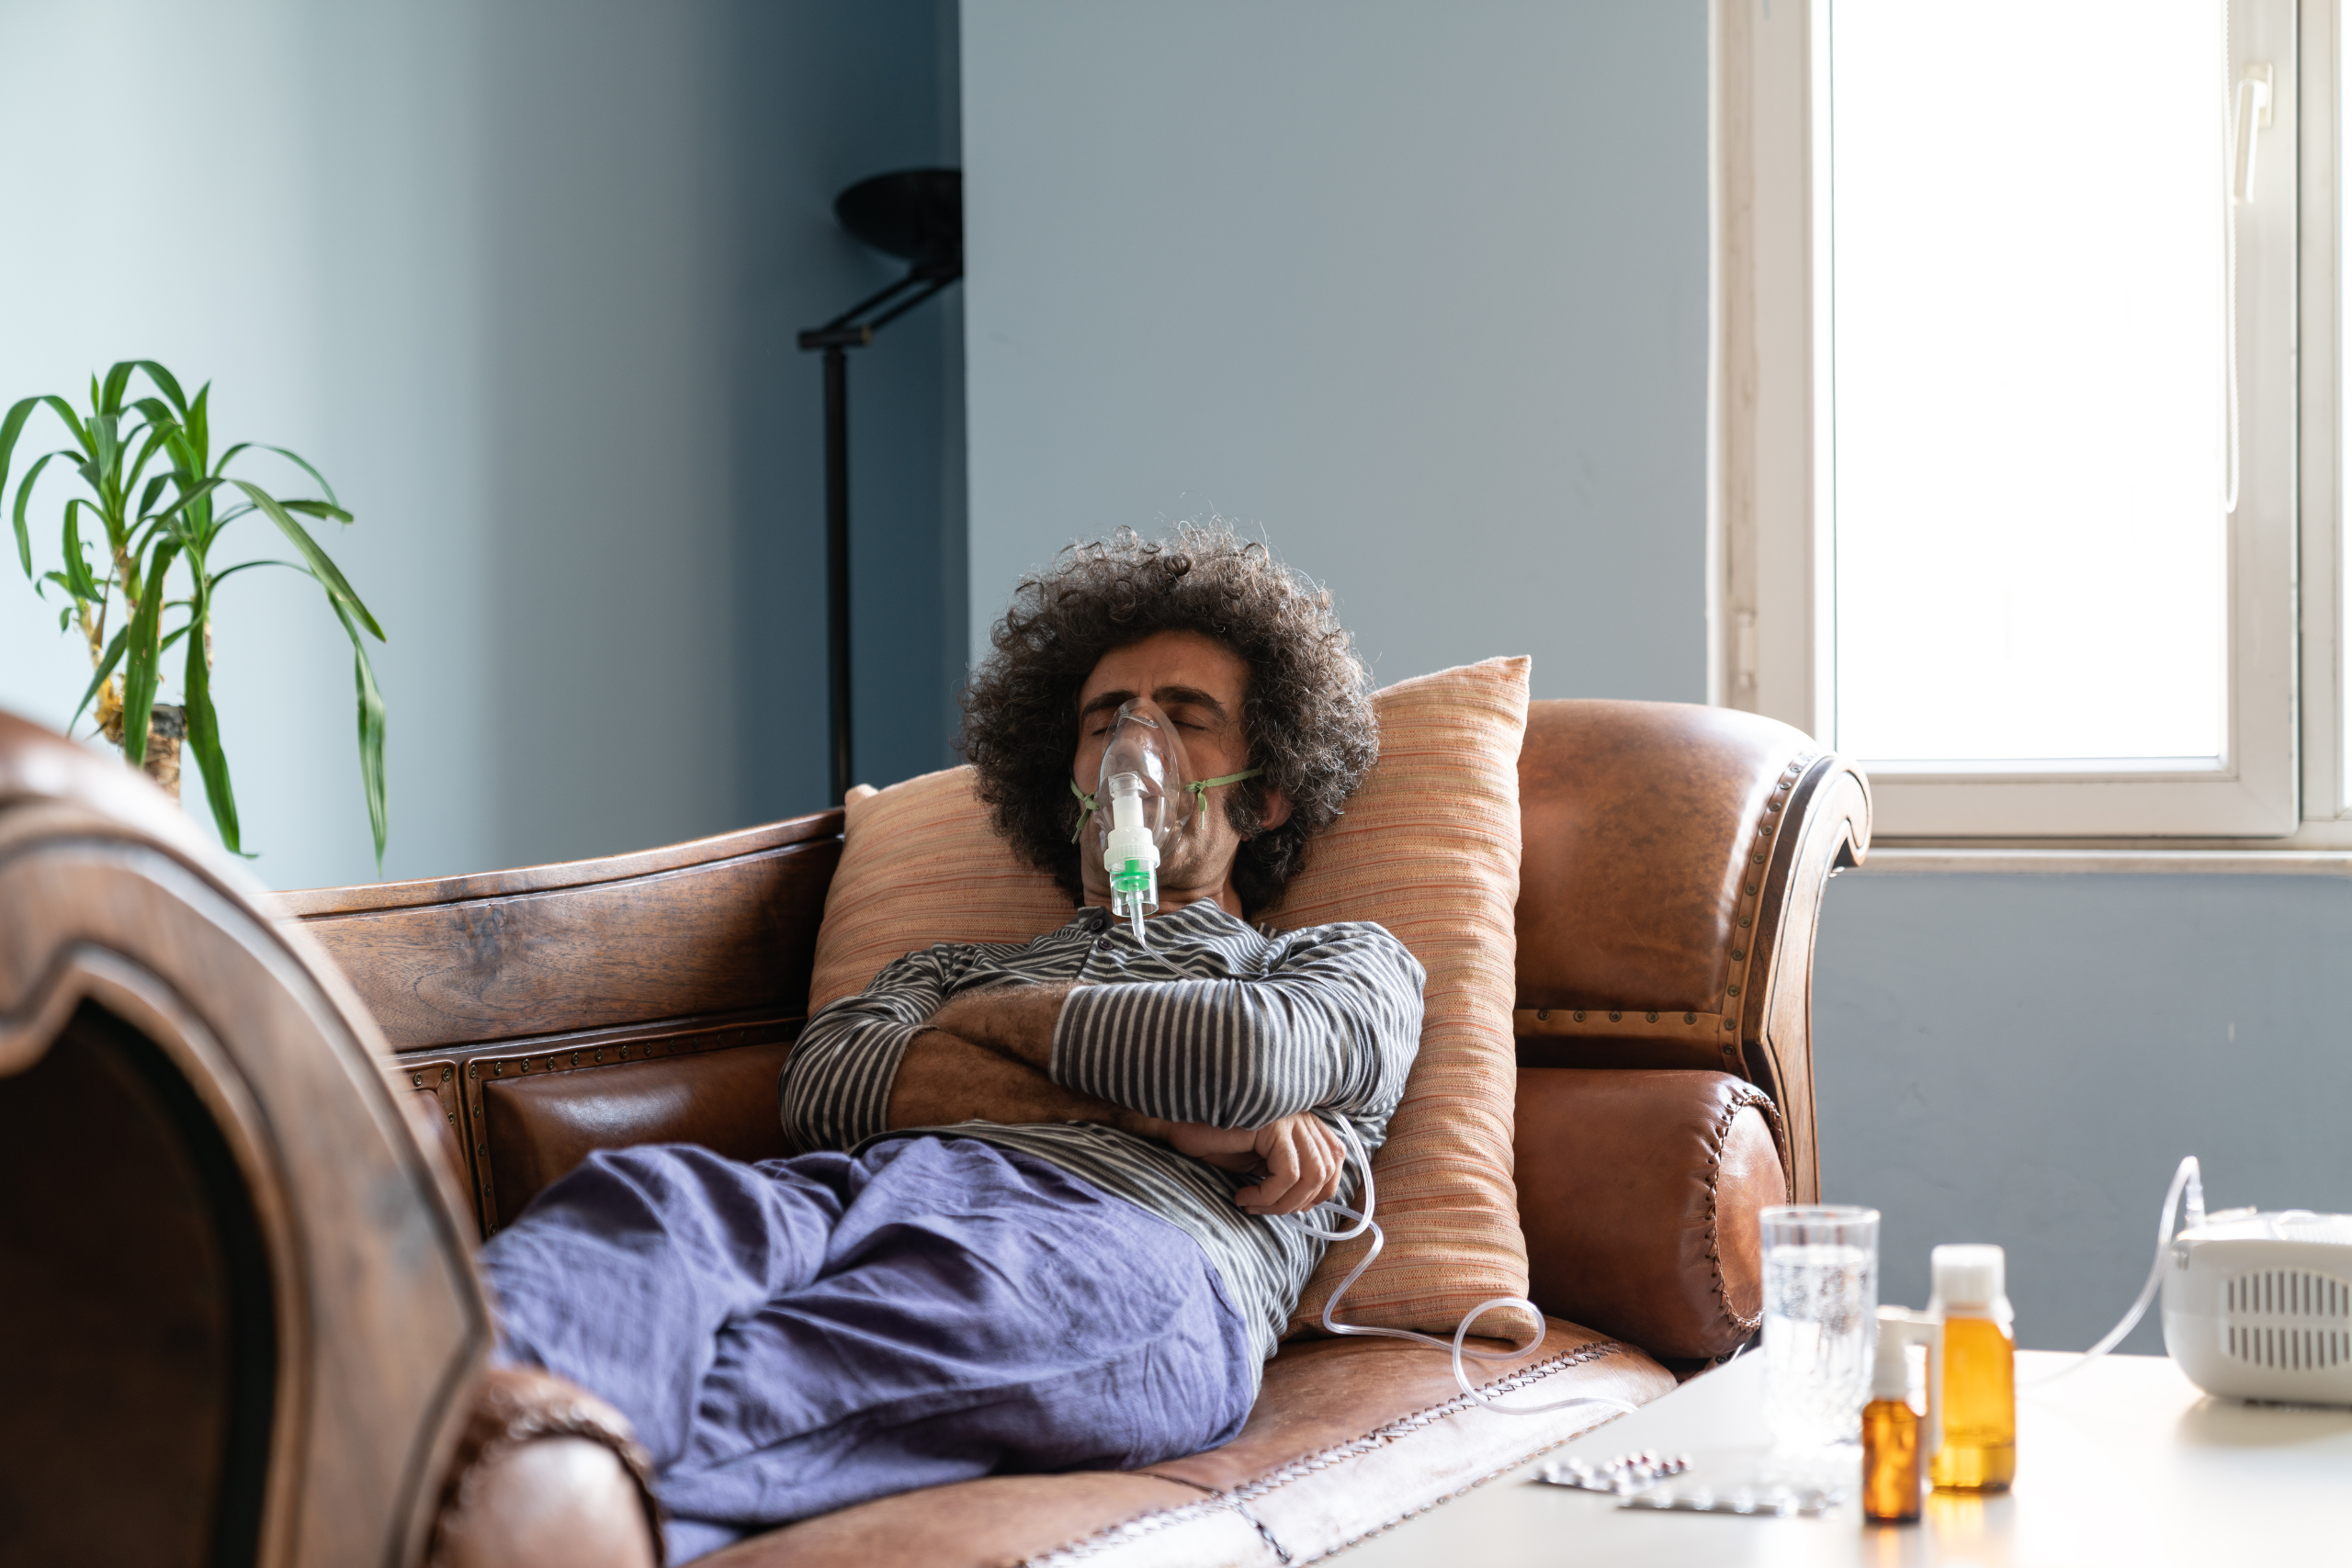 Man lying down on a couch using nebulizer